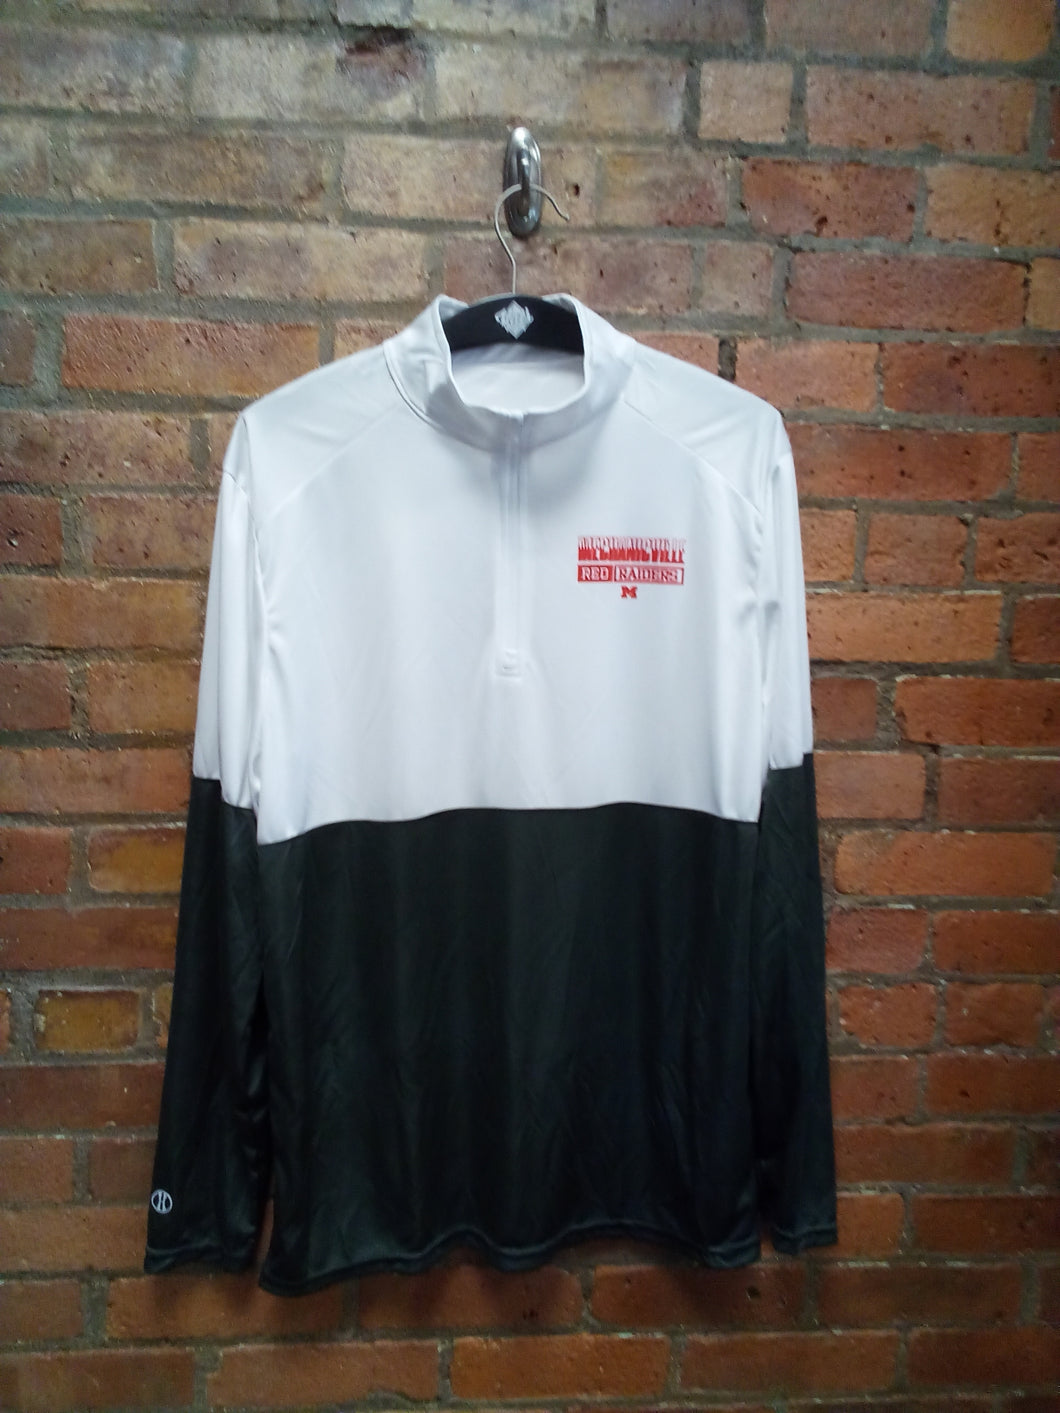 CLEARANCE - Mechanicville Red Raiders Grey and White quarter zip - Size Large